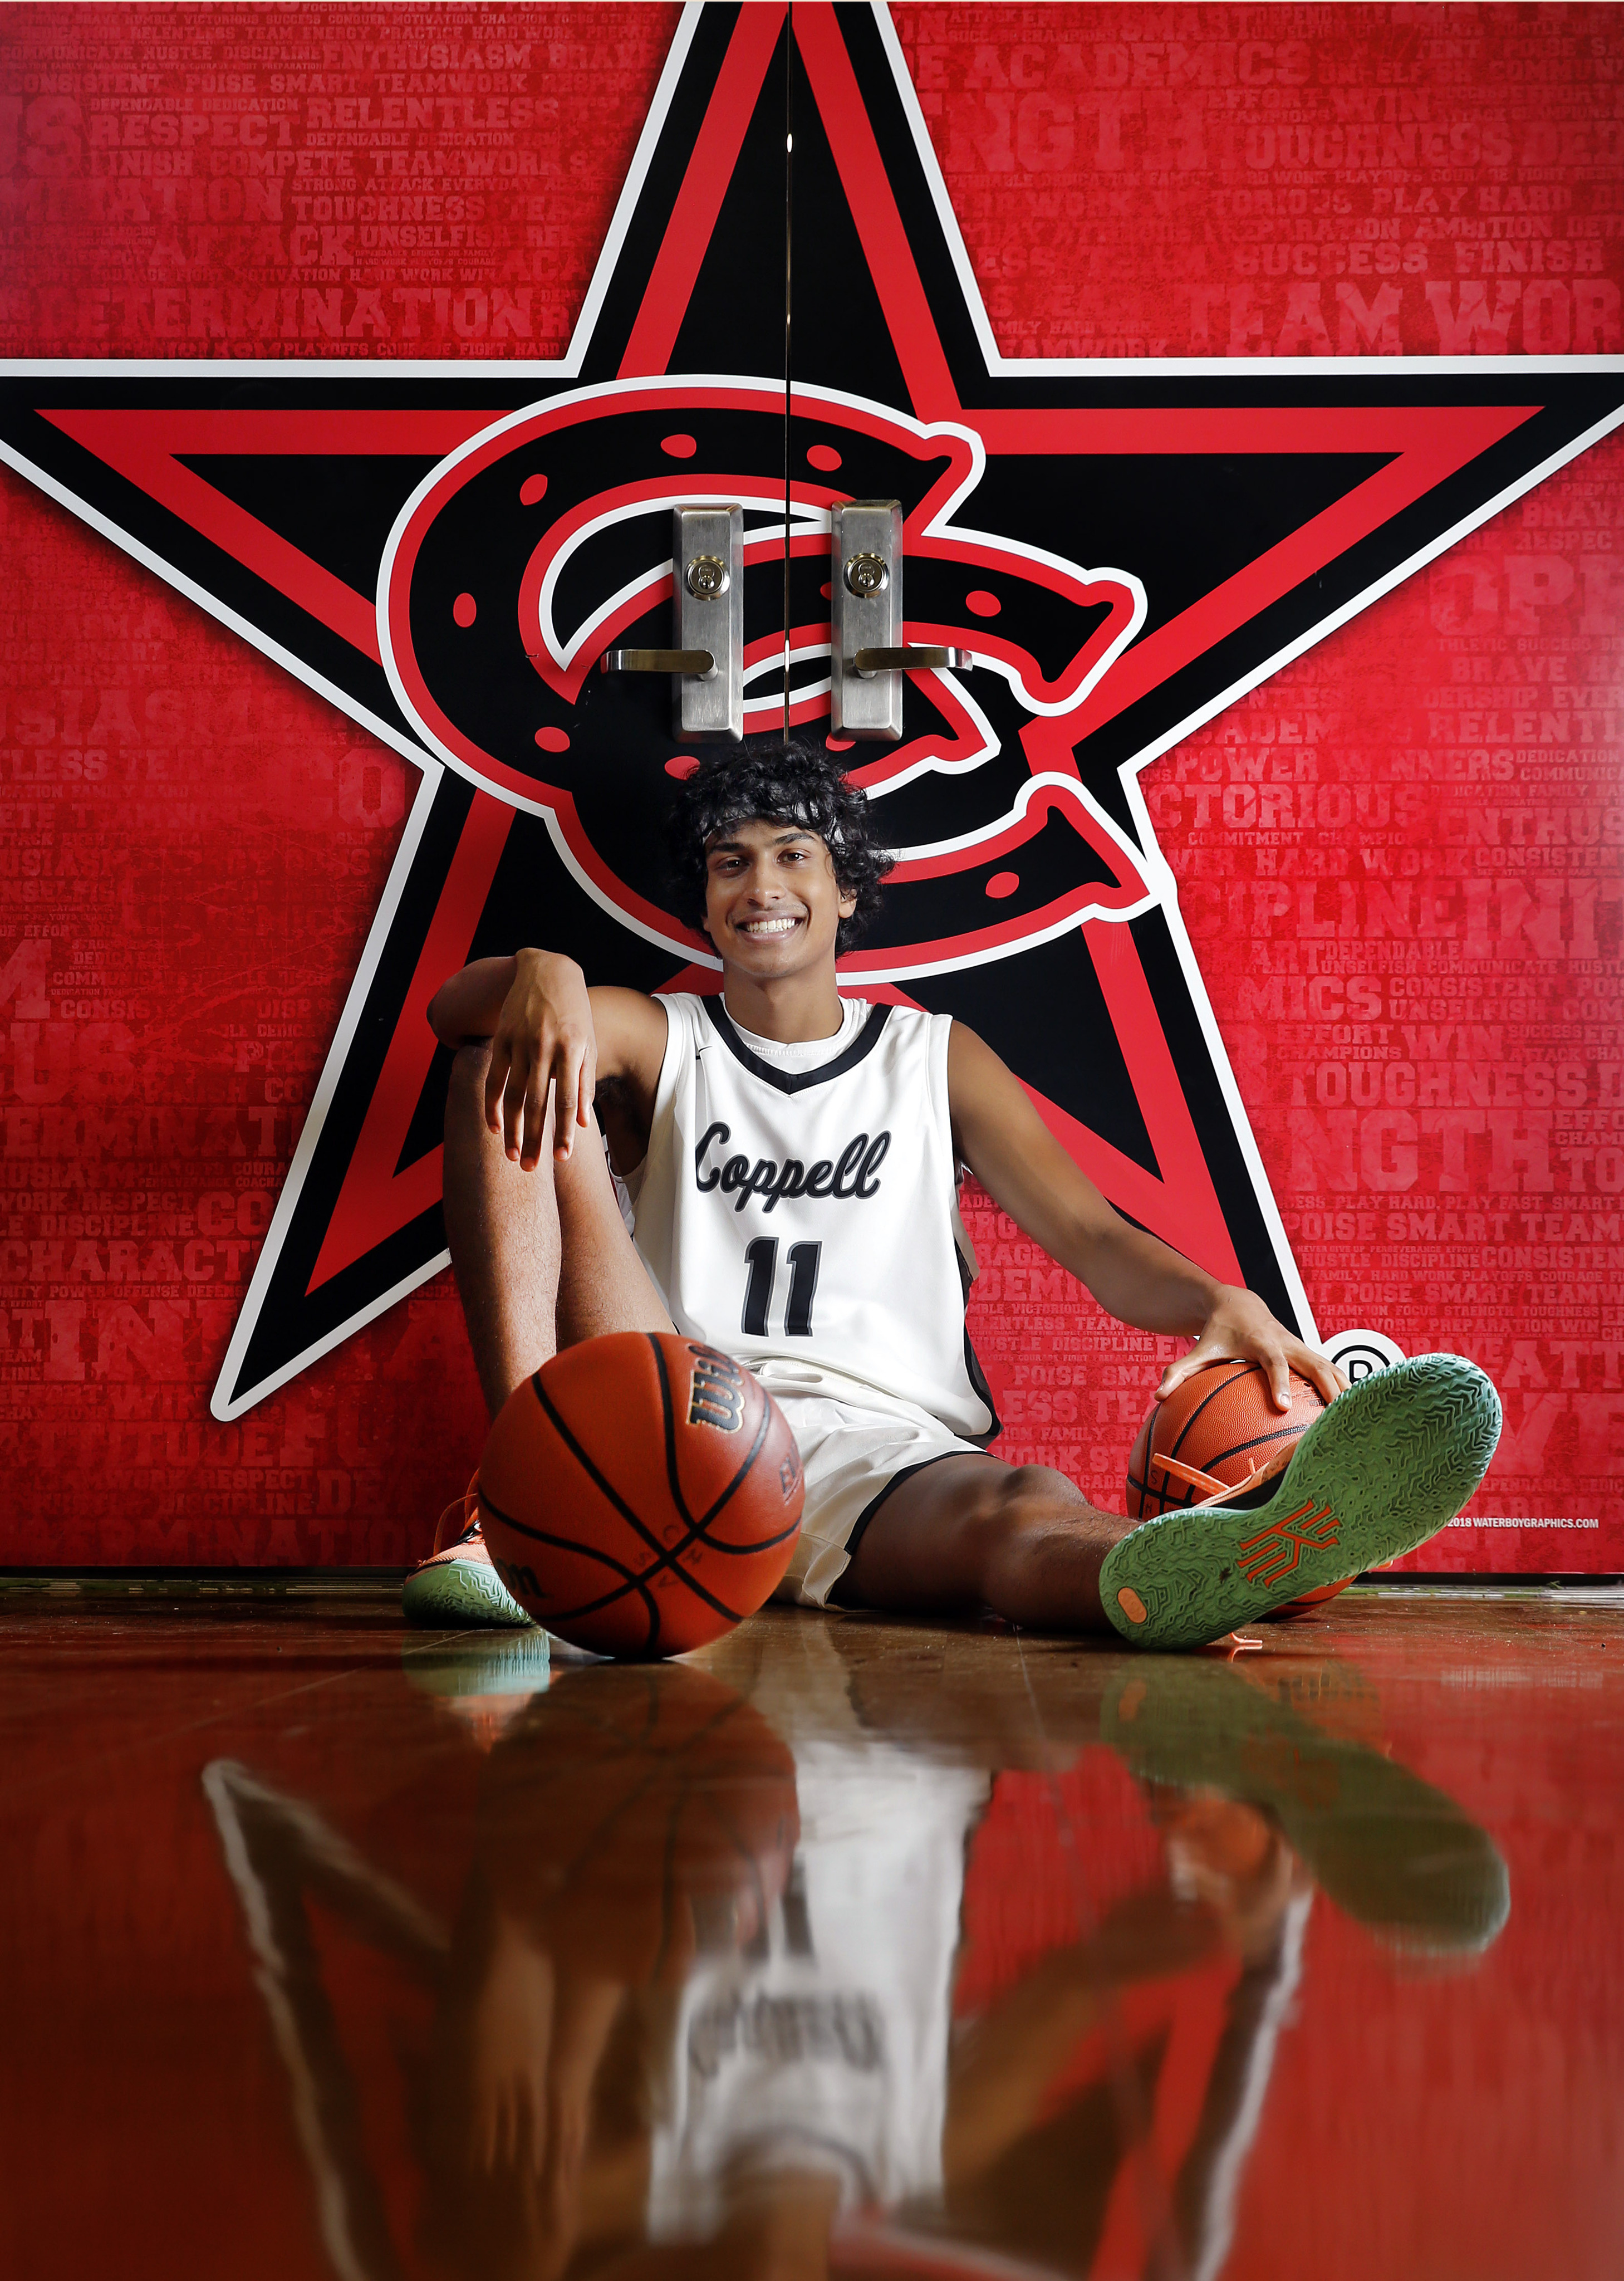 High School Basketball Star Mikey Williams Signs With Excel Sports